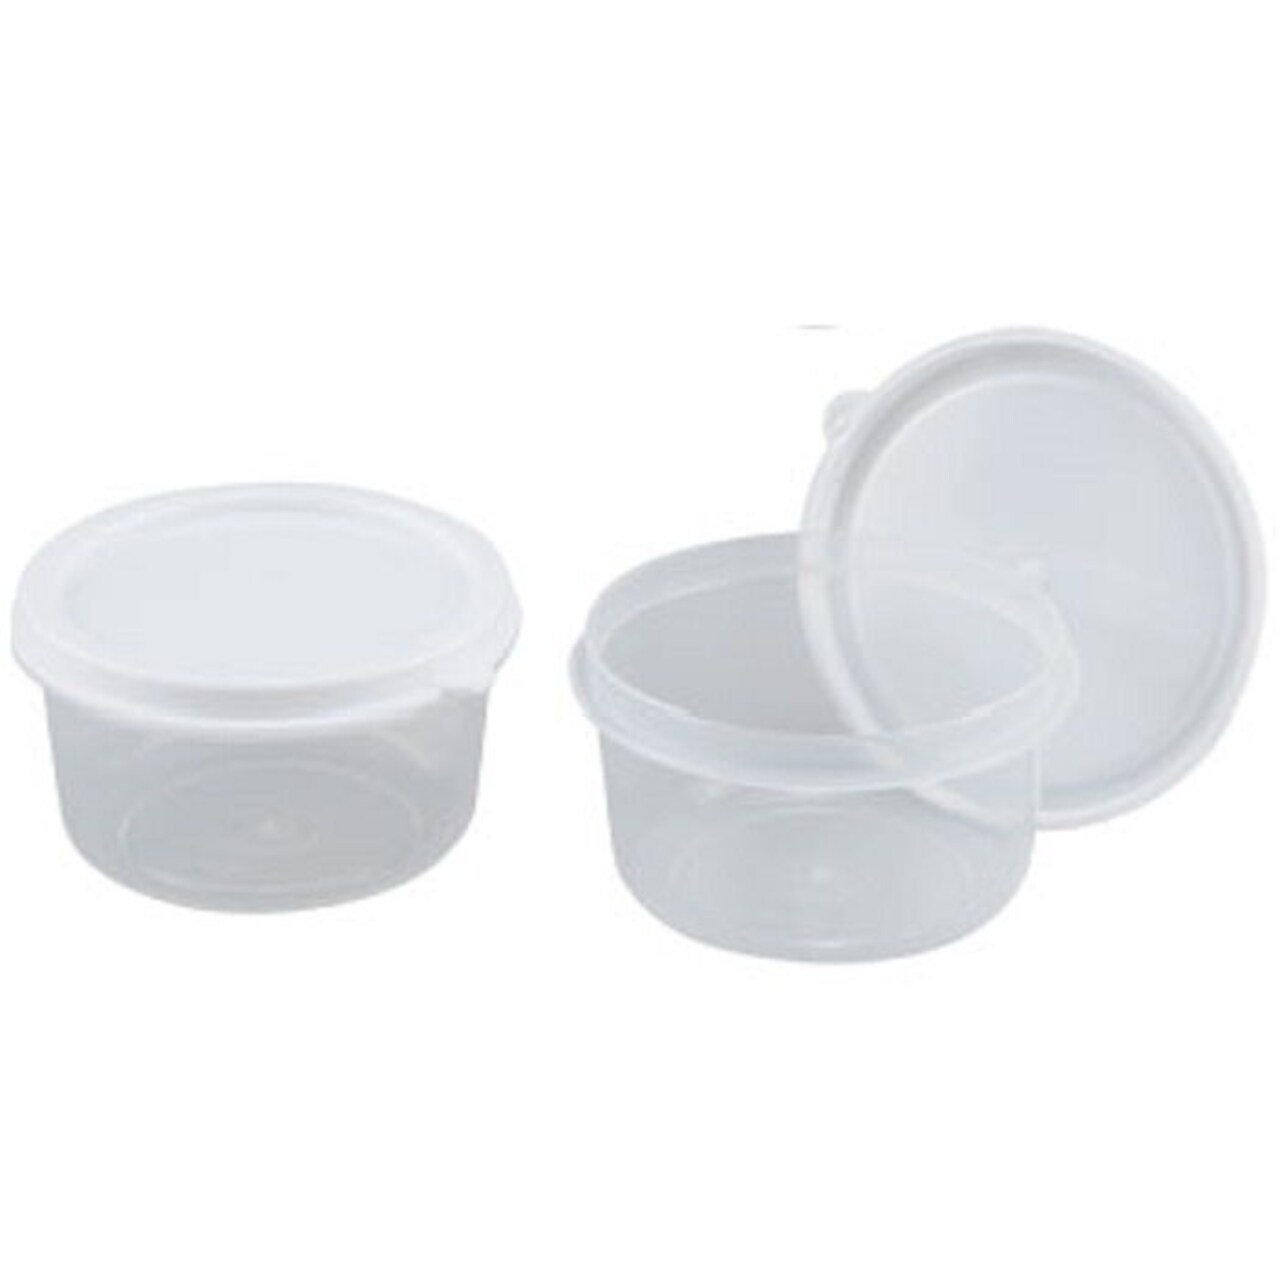 20 Pack of Small Round plastic Mini Storage Containers